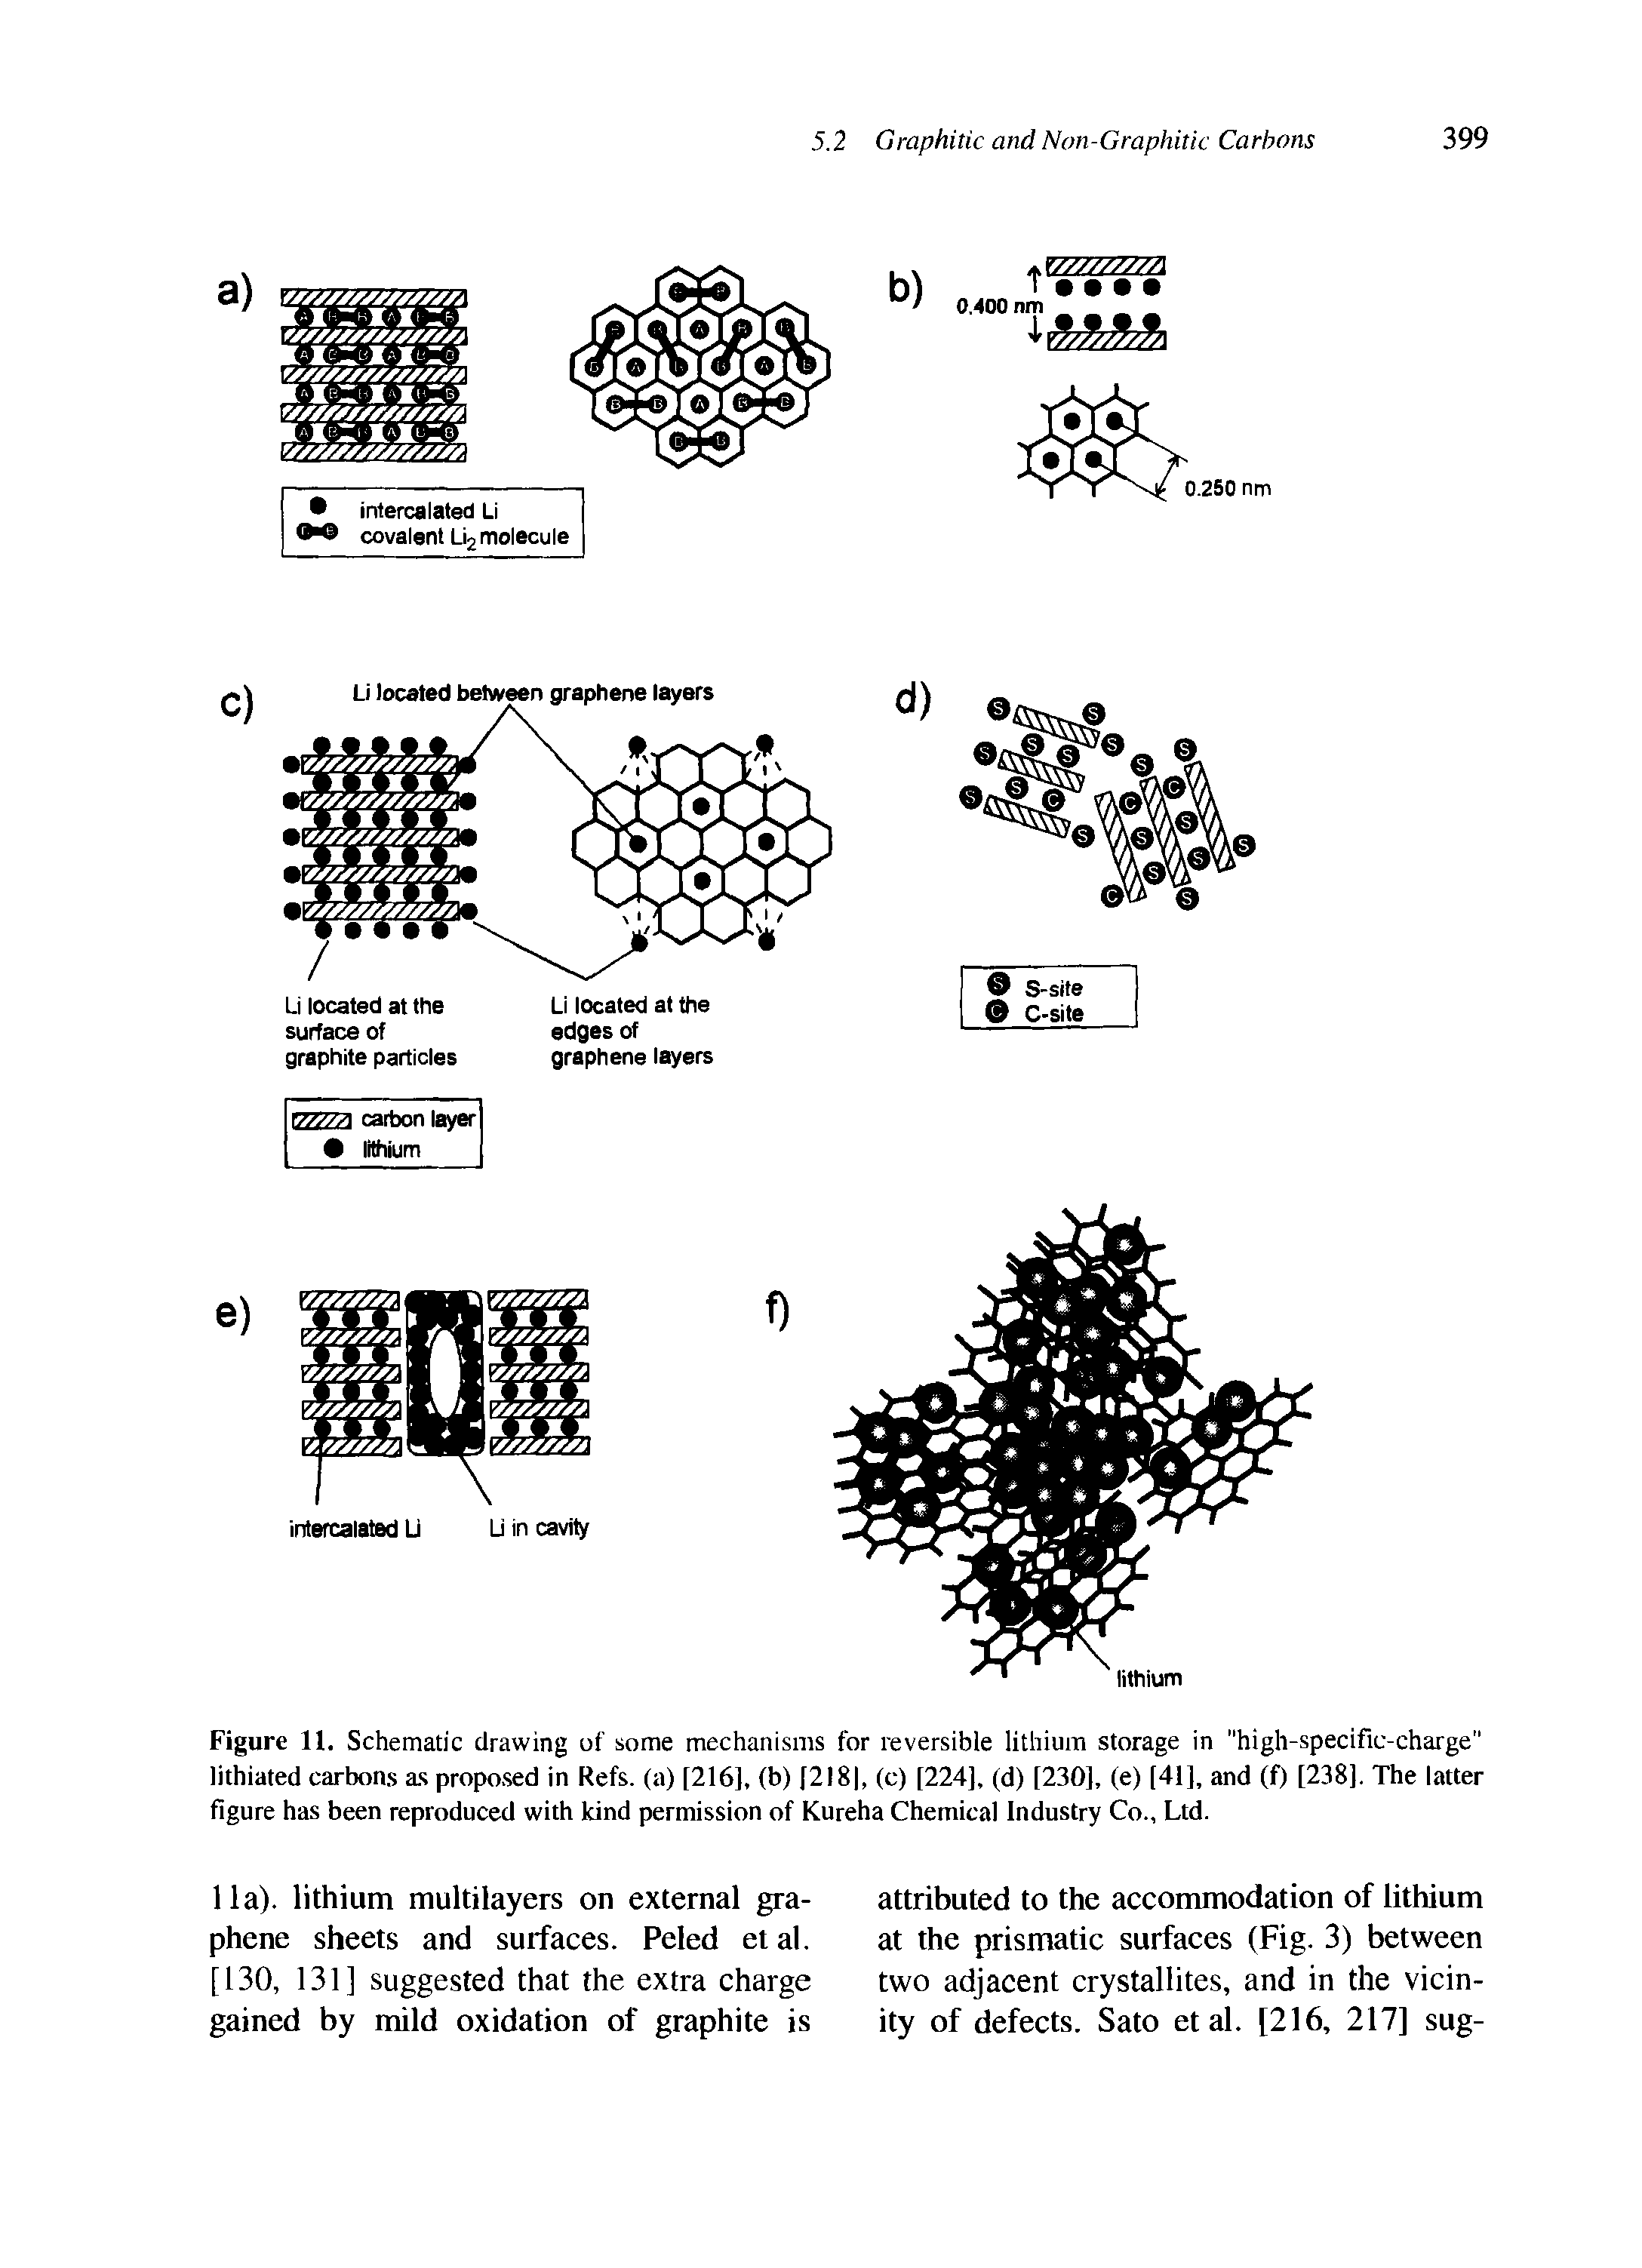 Figure 11. Schematic drawing of some mechanisms for reversible lithium storage in "high-specific-charge" lithiated carbons as proposed in Refs, (a) [216], (b) [218, (c) [224], (d) [230], (e) [41], and (f) [238]. The latter figure has been reproduced with kind permission of Kureha Chemical Industry Co., Ltd.